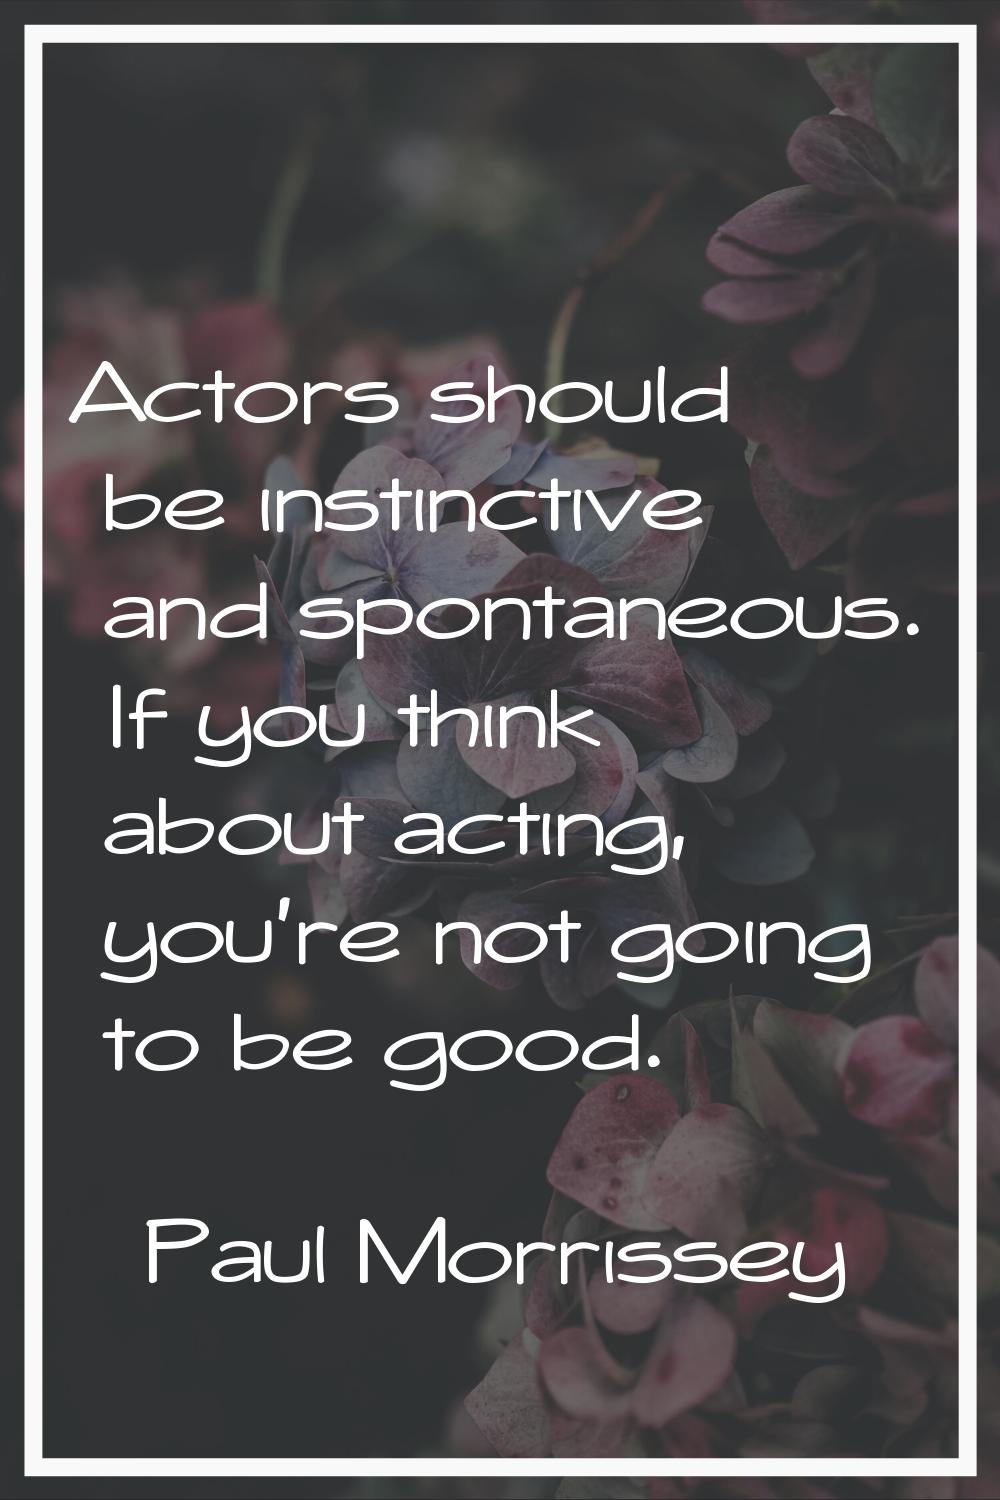 Actors should be instinctive and spontaneous. If you think about acting, you're not going to be goo